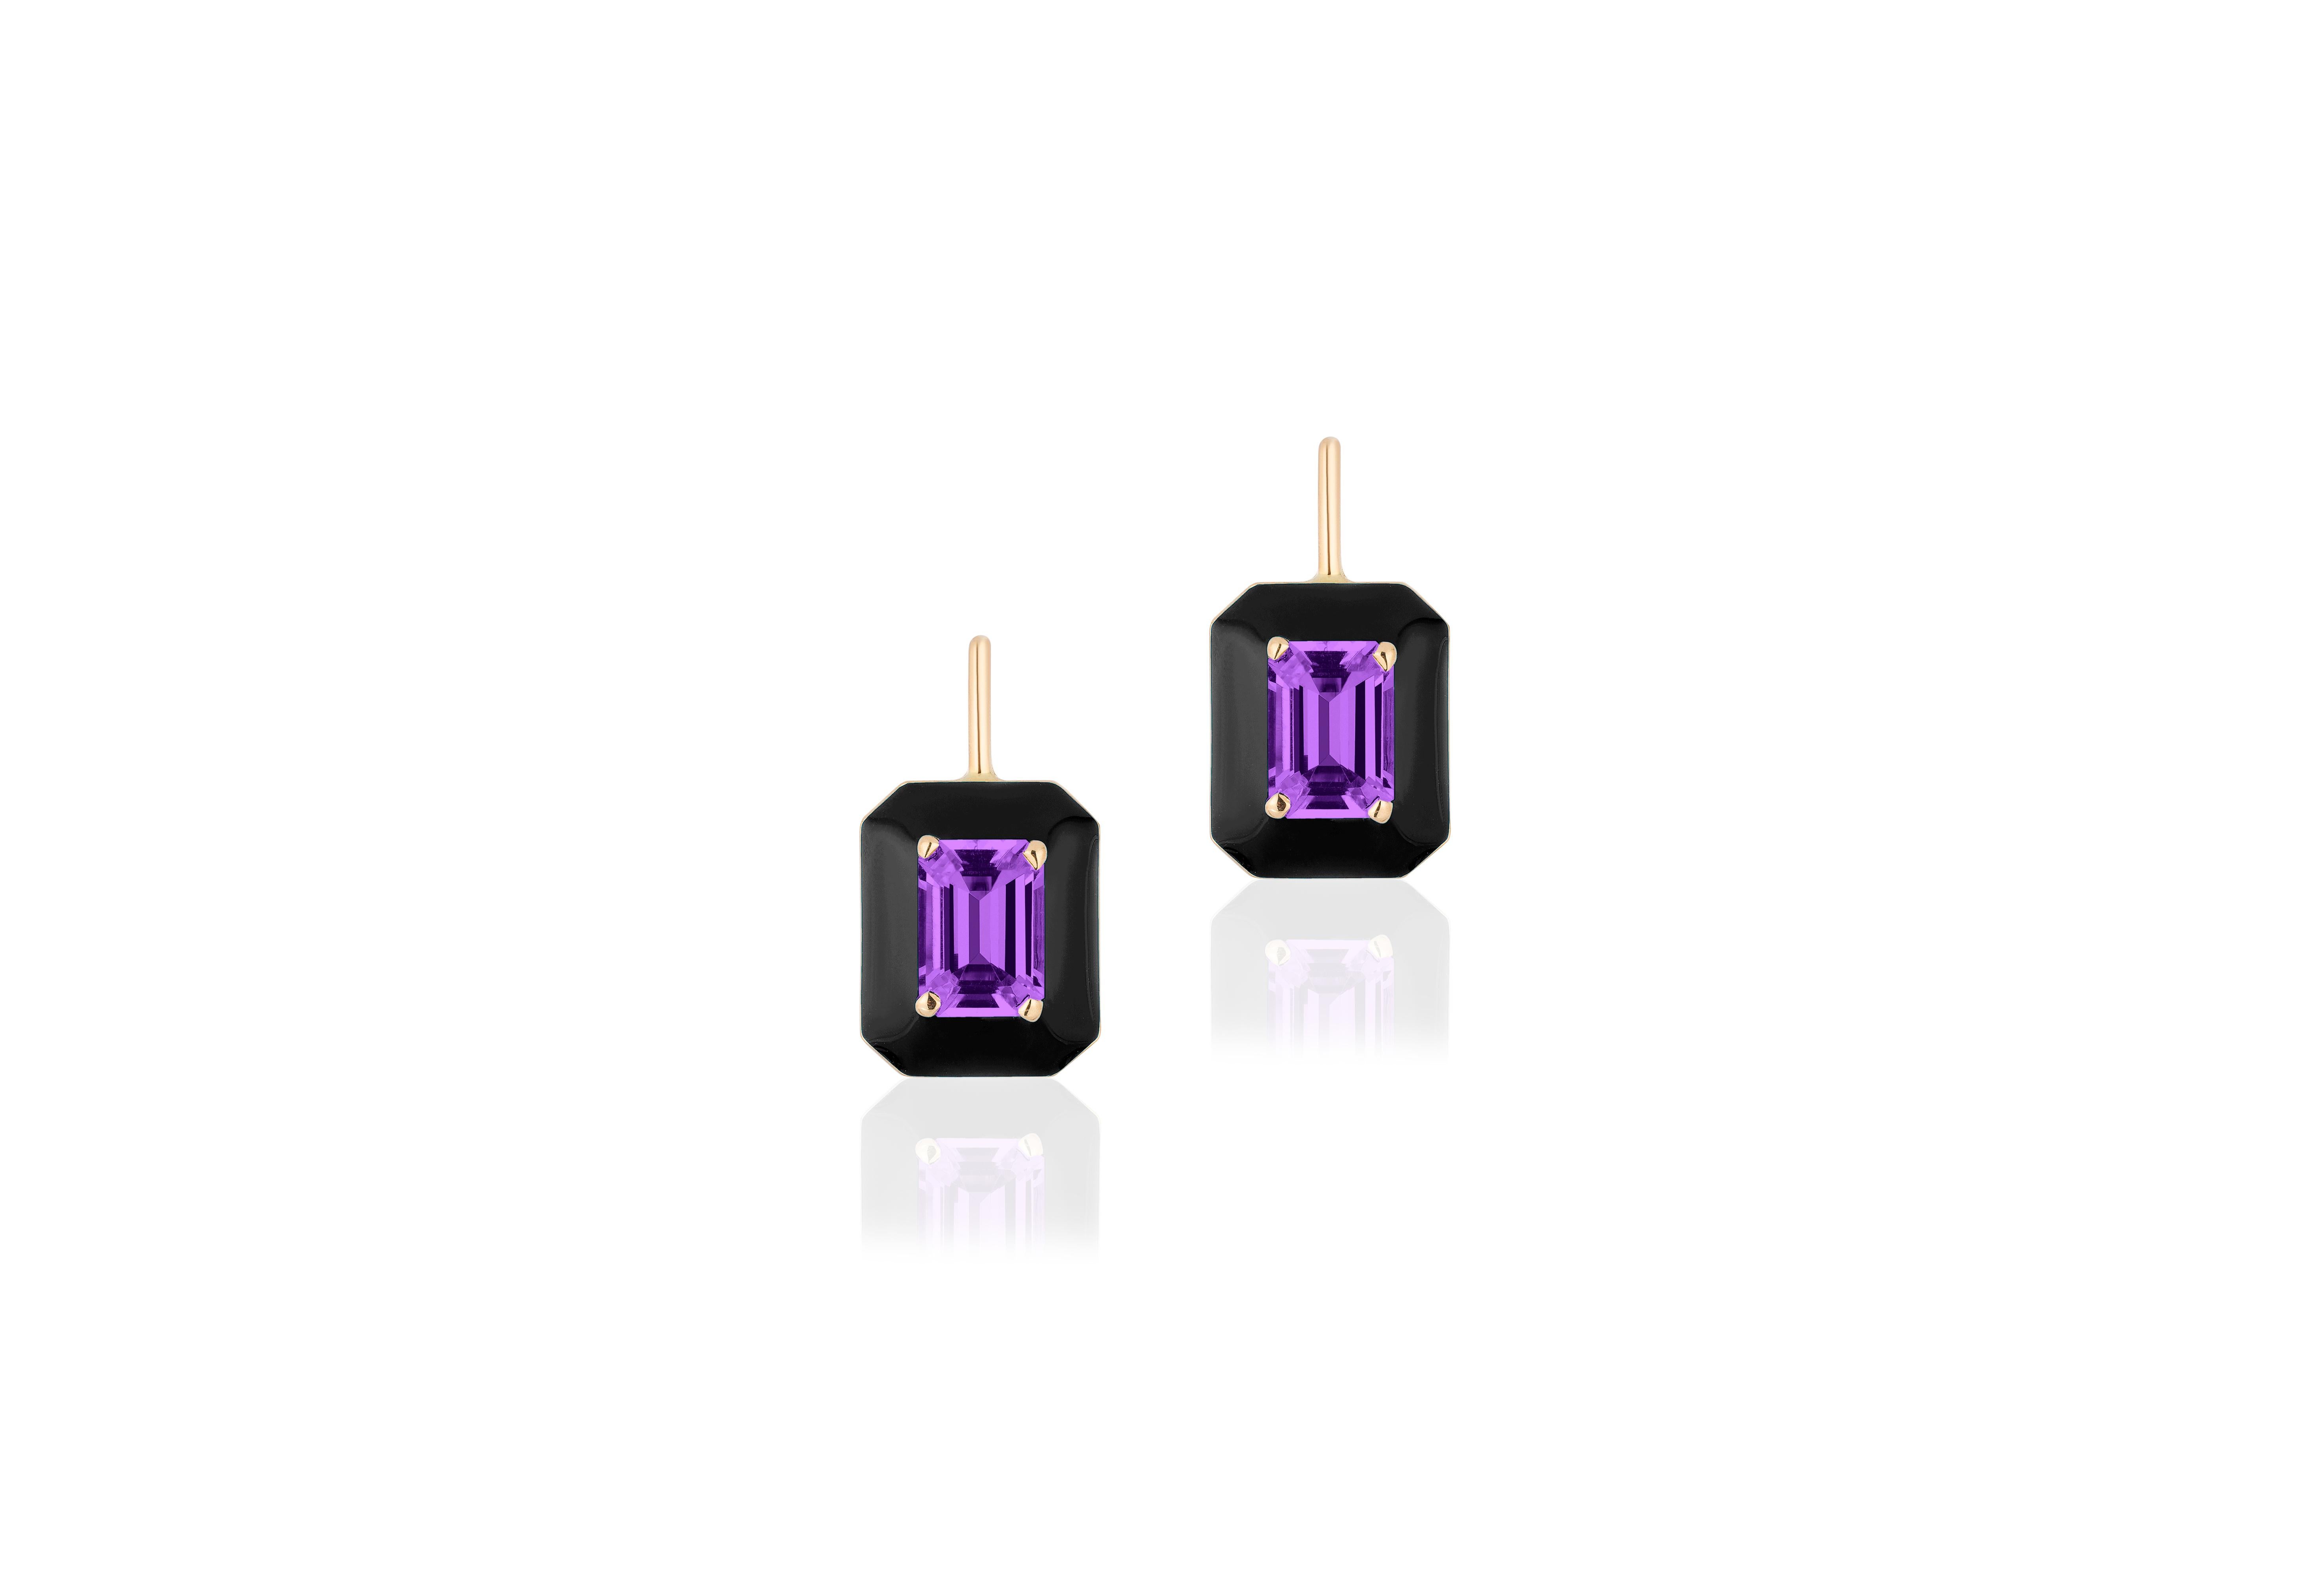 These unique earrings are an Amethyst Emerald Cut, with Black Enamel border and Lever back. From our ‘Queen’ Collection, it was inspired by royalty, but with a modern twist. The combination of enamel, and Amethyst represents power, richness and